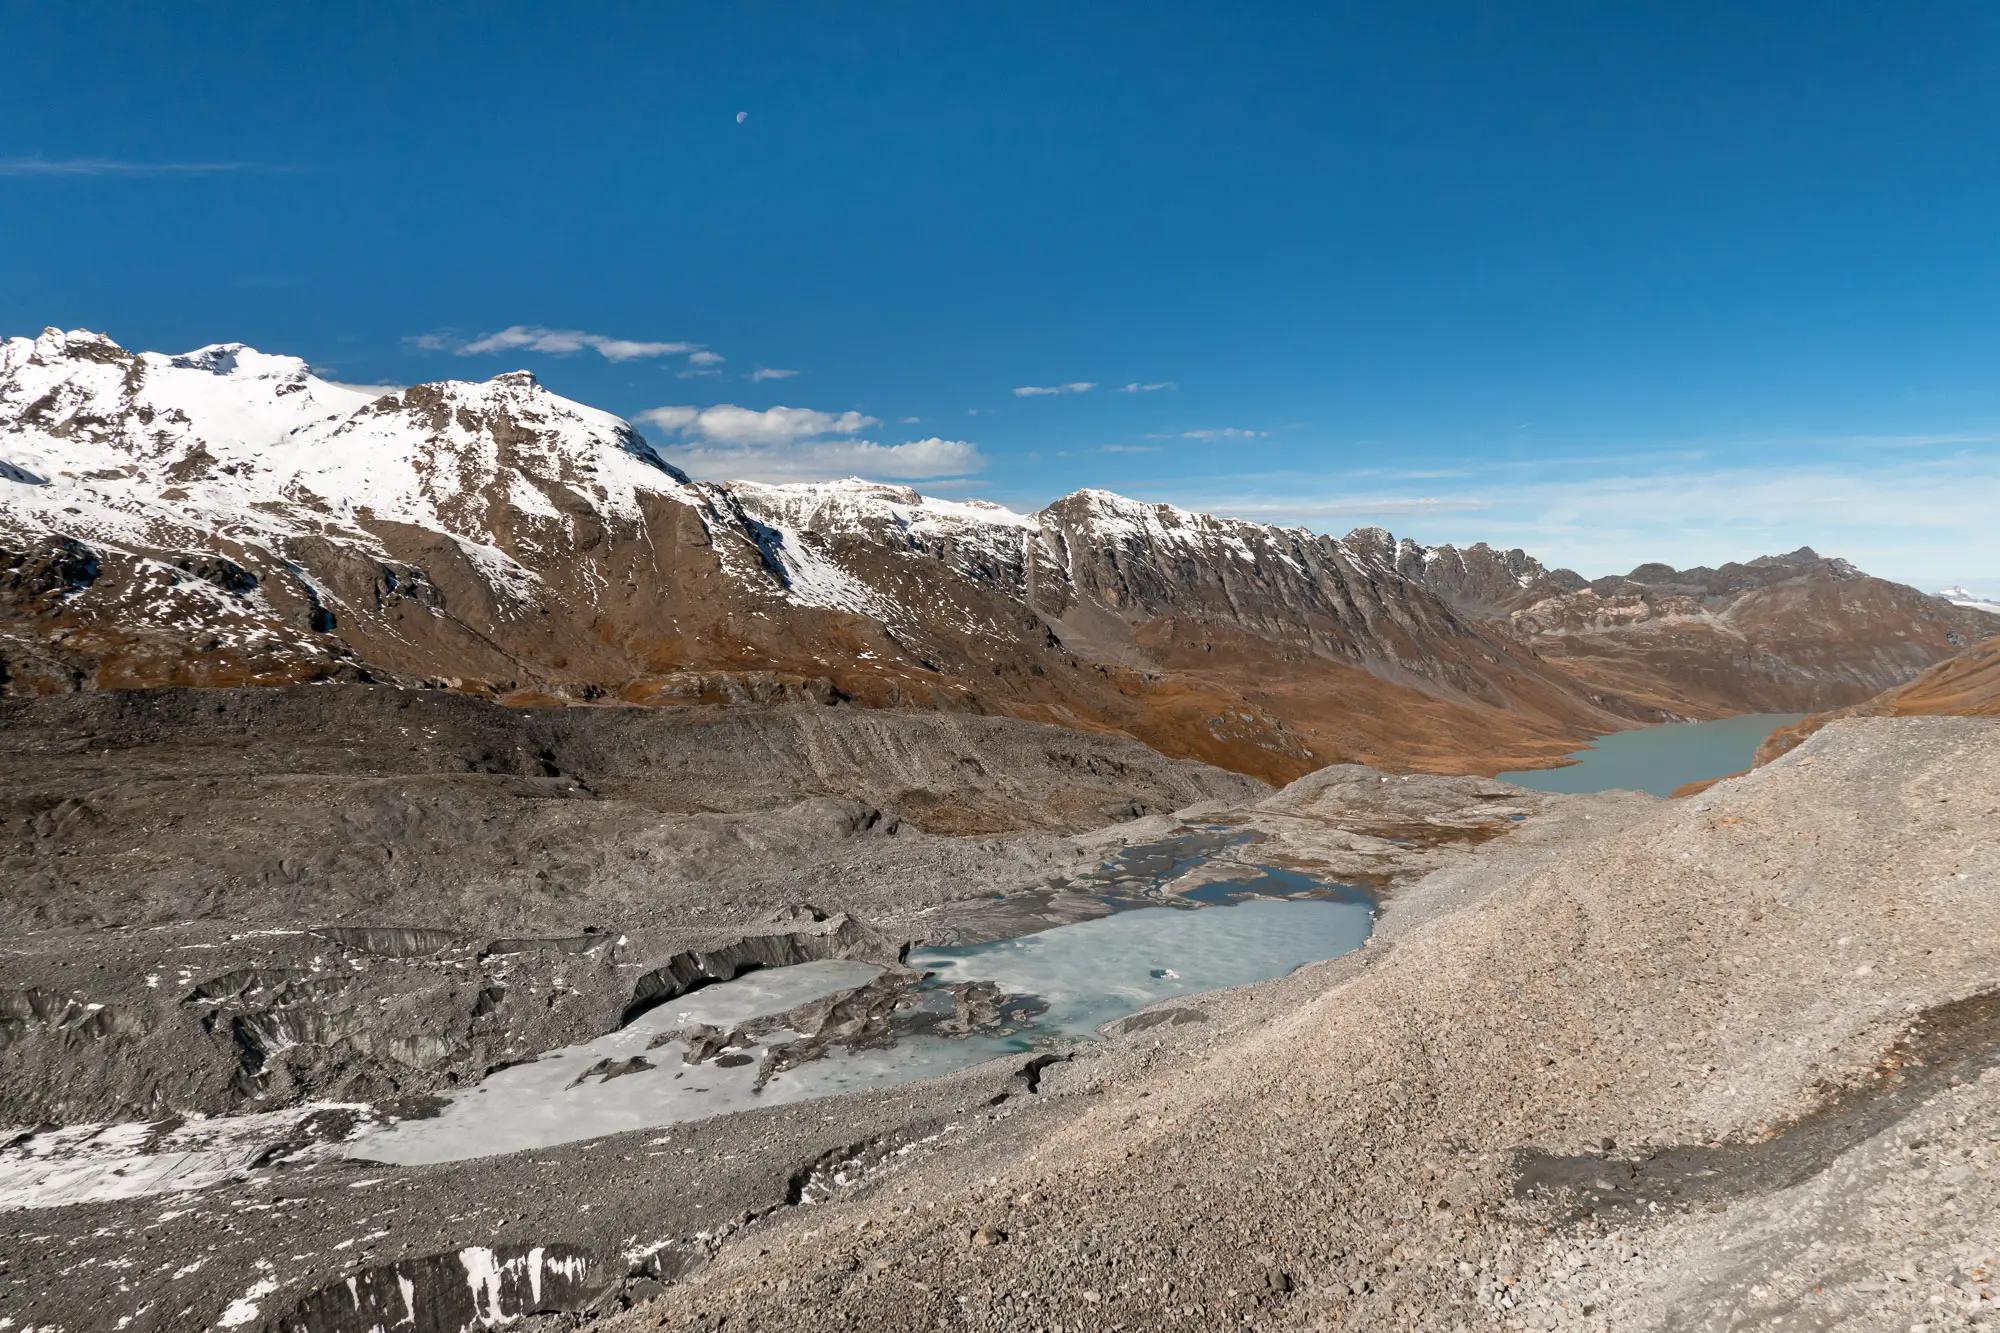 Glacial lake at the end of Glacier de Cheilon, formed by the melting of the glacier